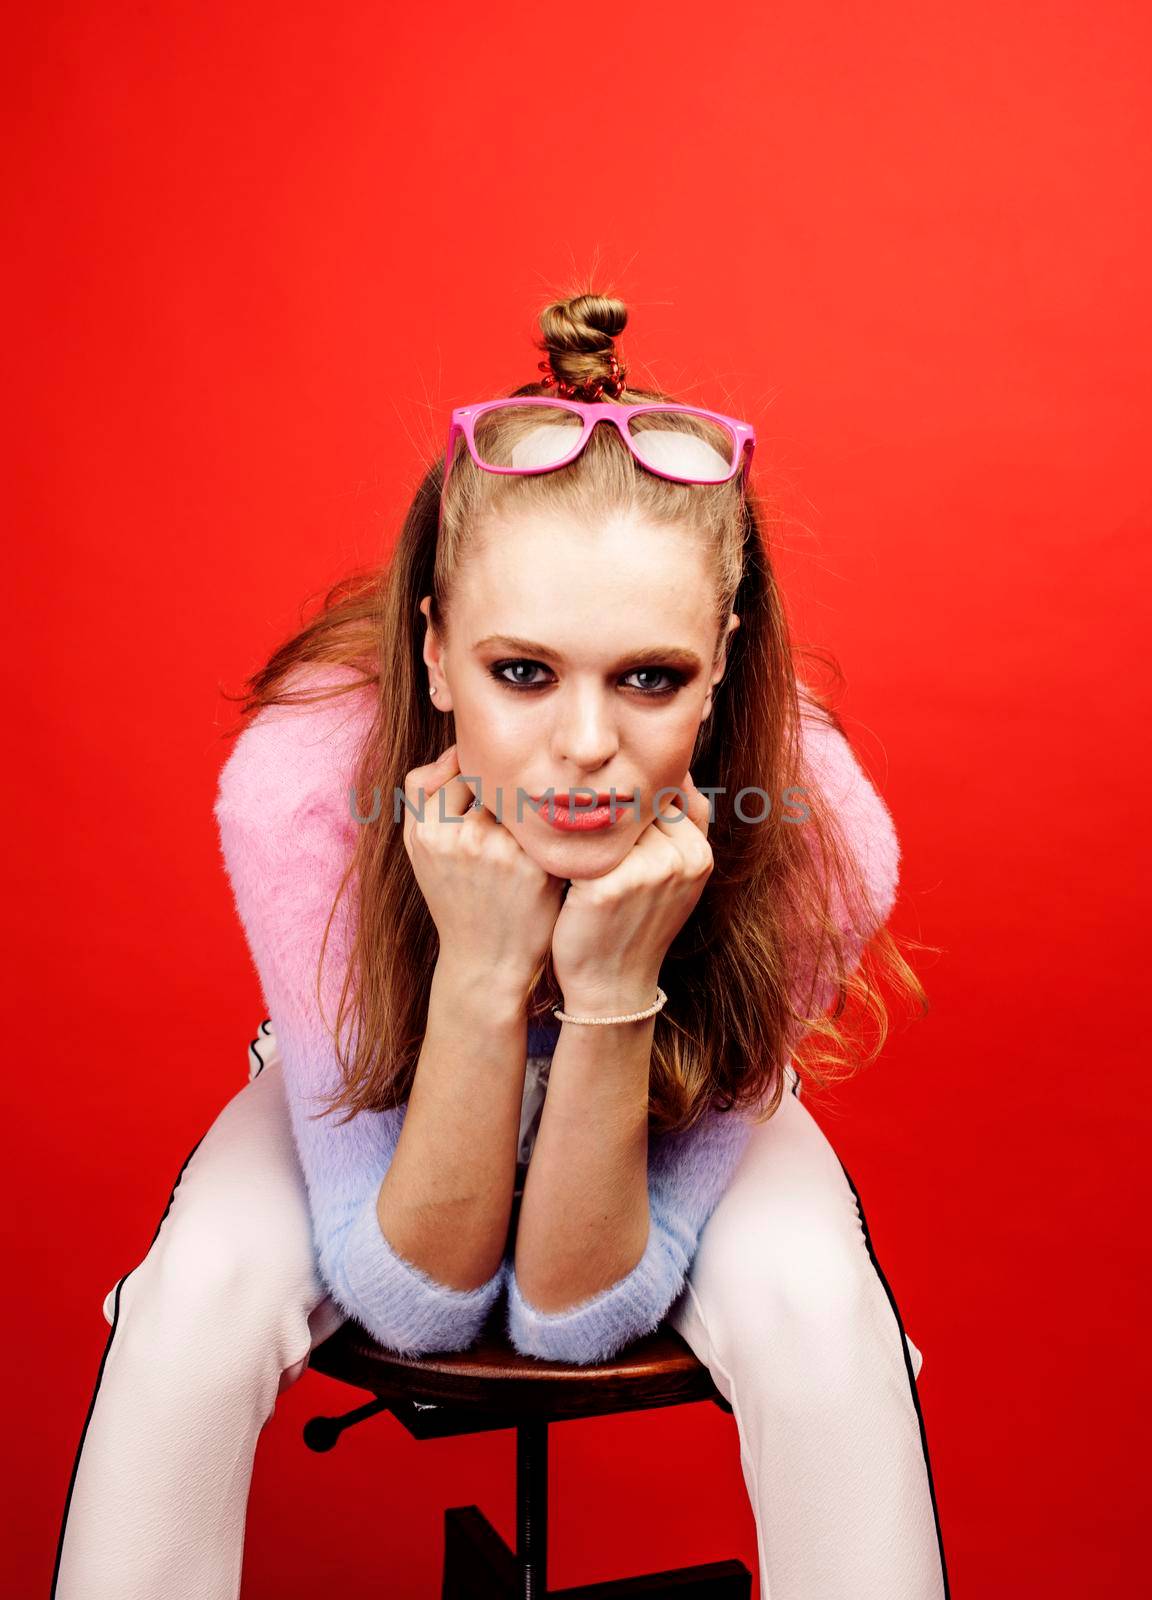 young pretty emitonal posing teenage girl on bright red background, happy smiling lifestyle people concept by JordanJ